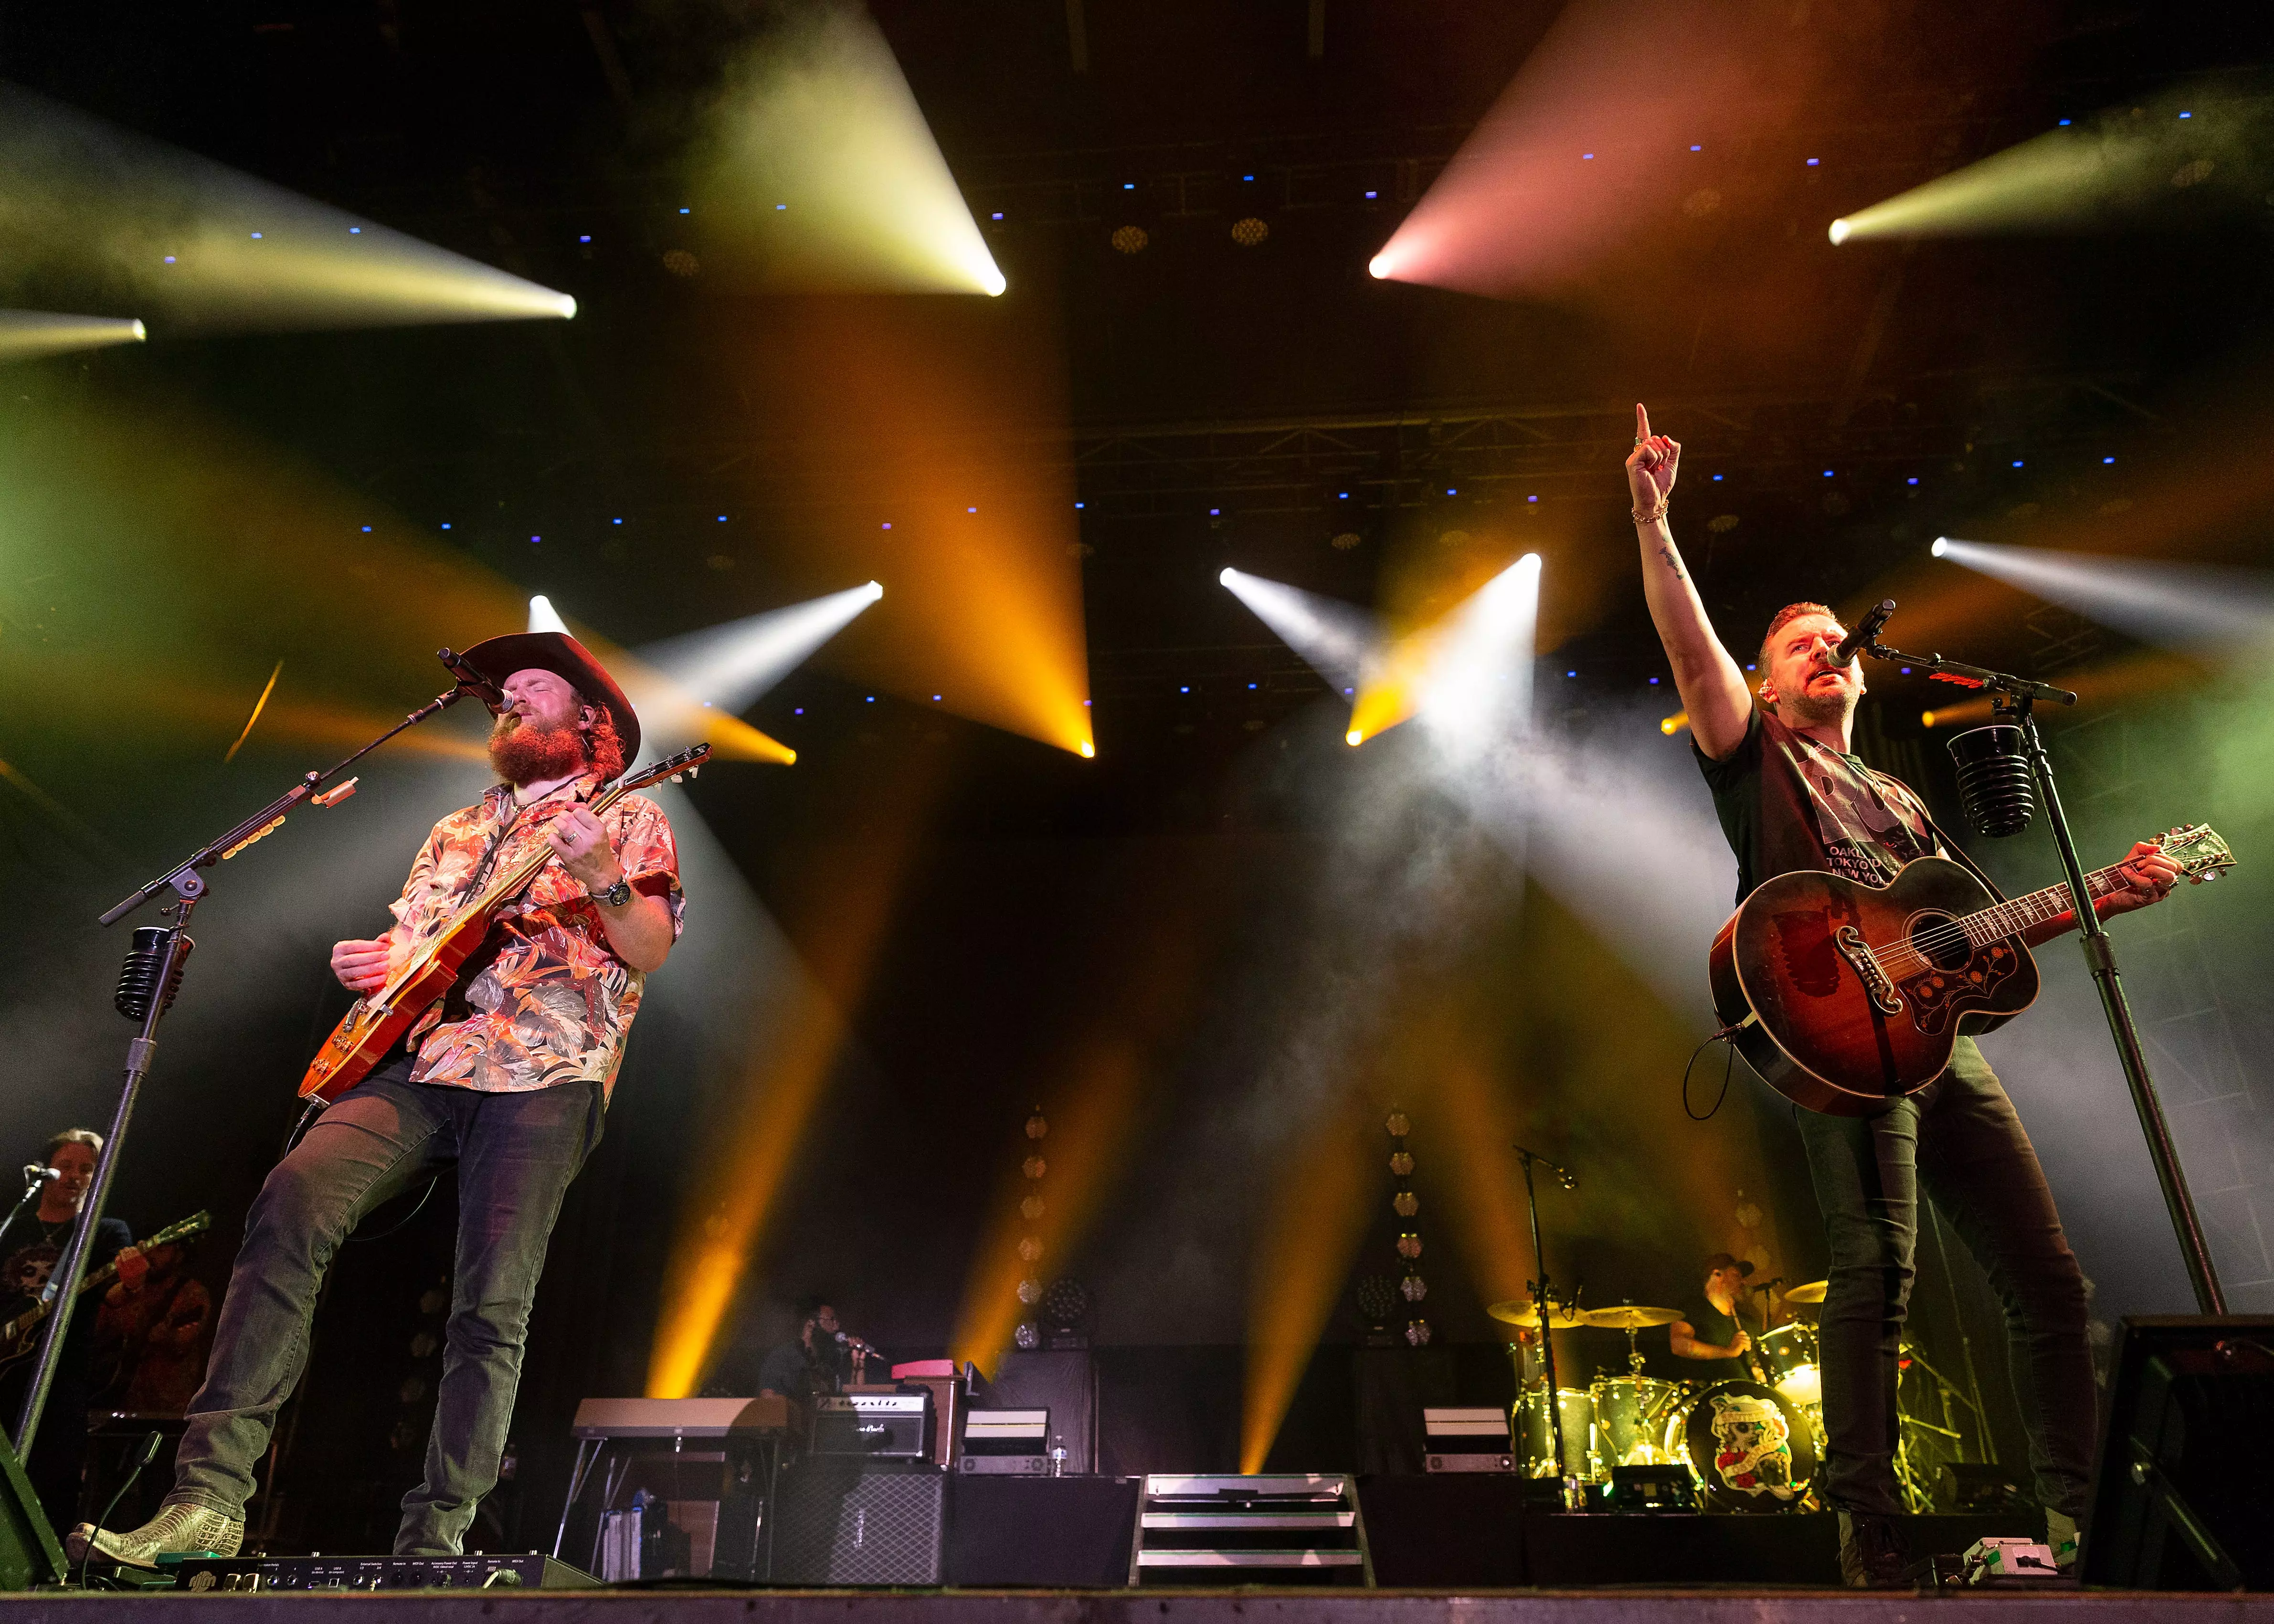 John Osborne and T.J. Osborne of Brothers Osborne perform on stage at PNE Amphitheatre on September 01, 2022, in Vancouver, British Columbia, Canada.